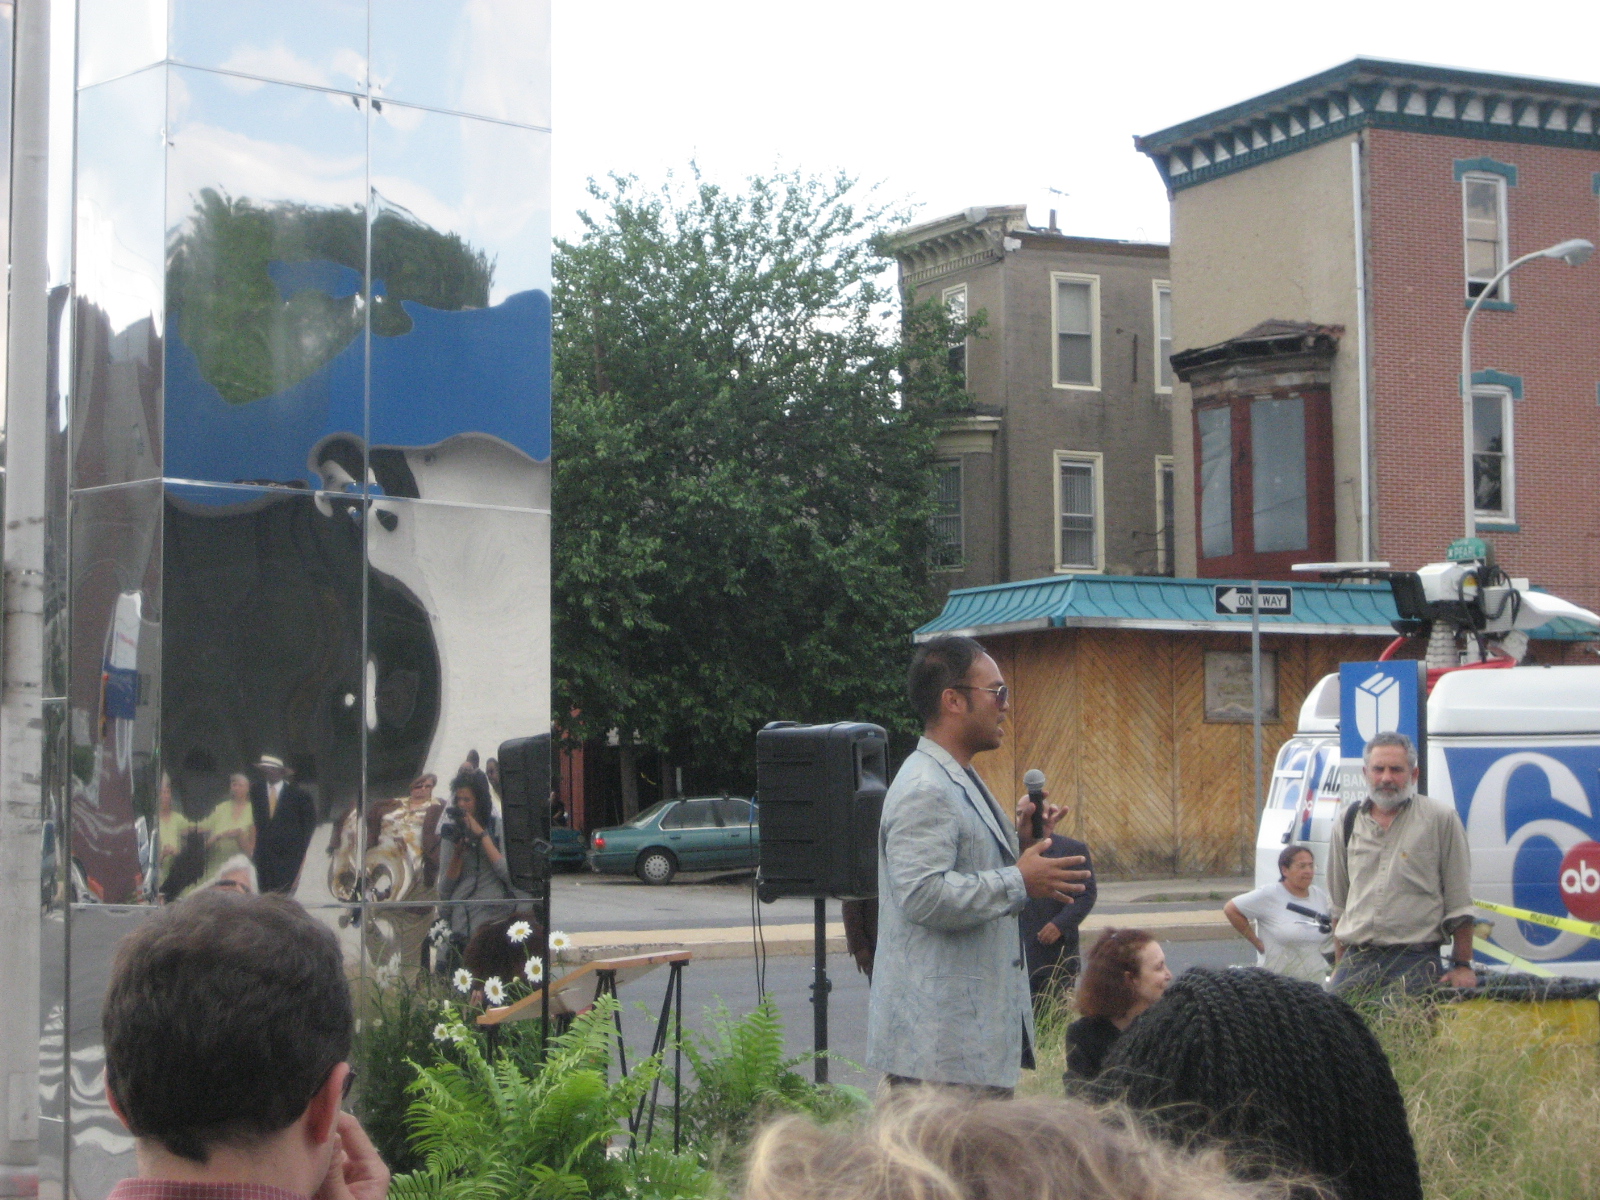 Artist Jeffrey Manuel explains to neighbors in Powelton Village the creative process behind the new sculpture.